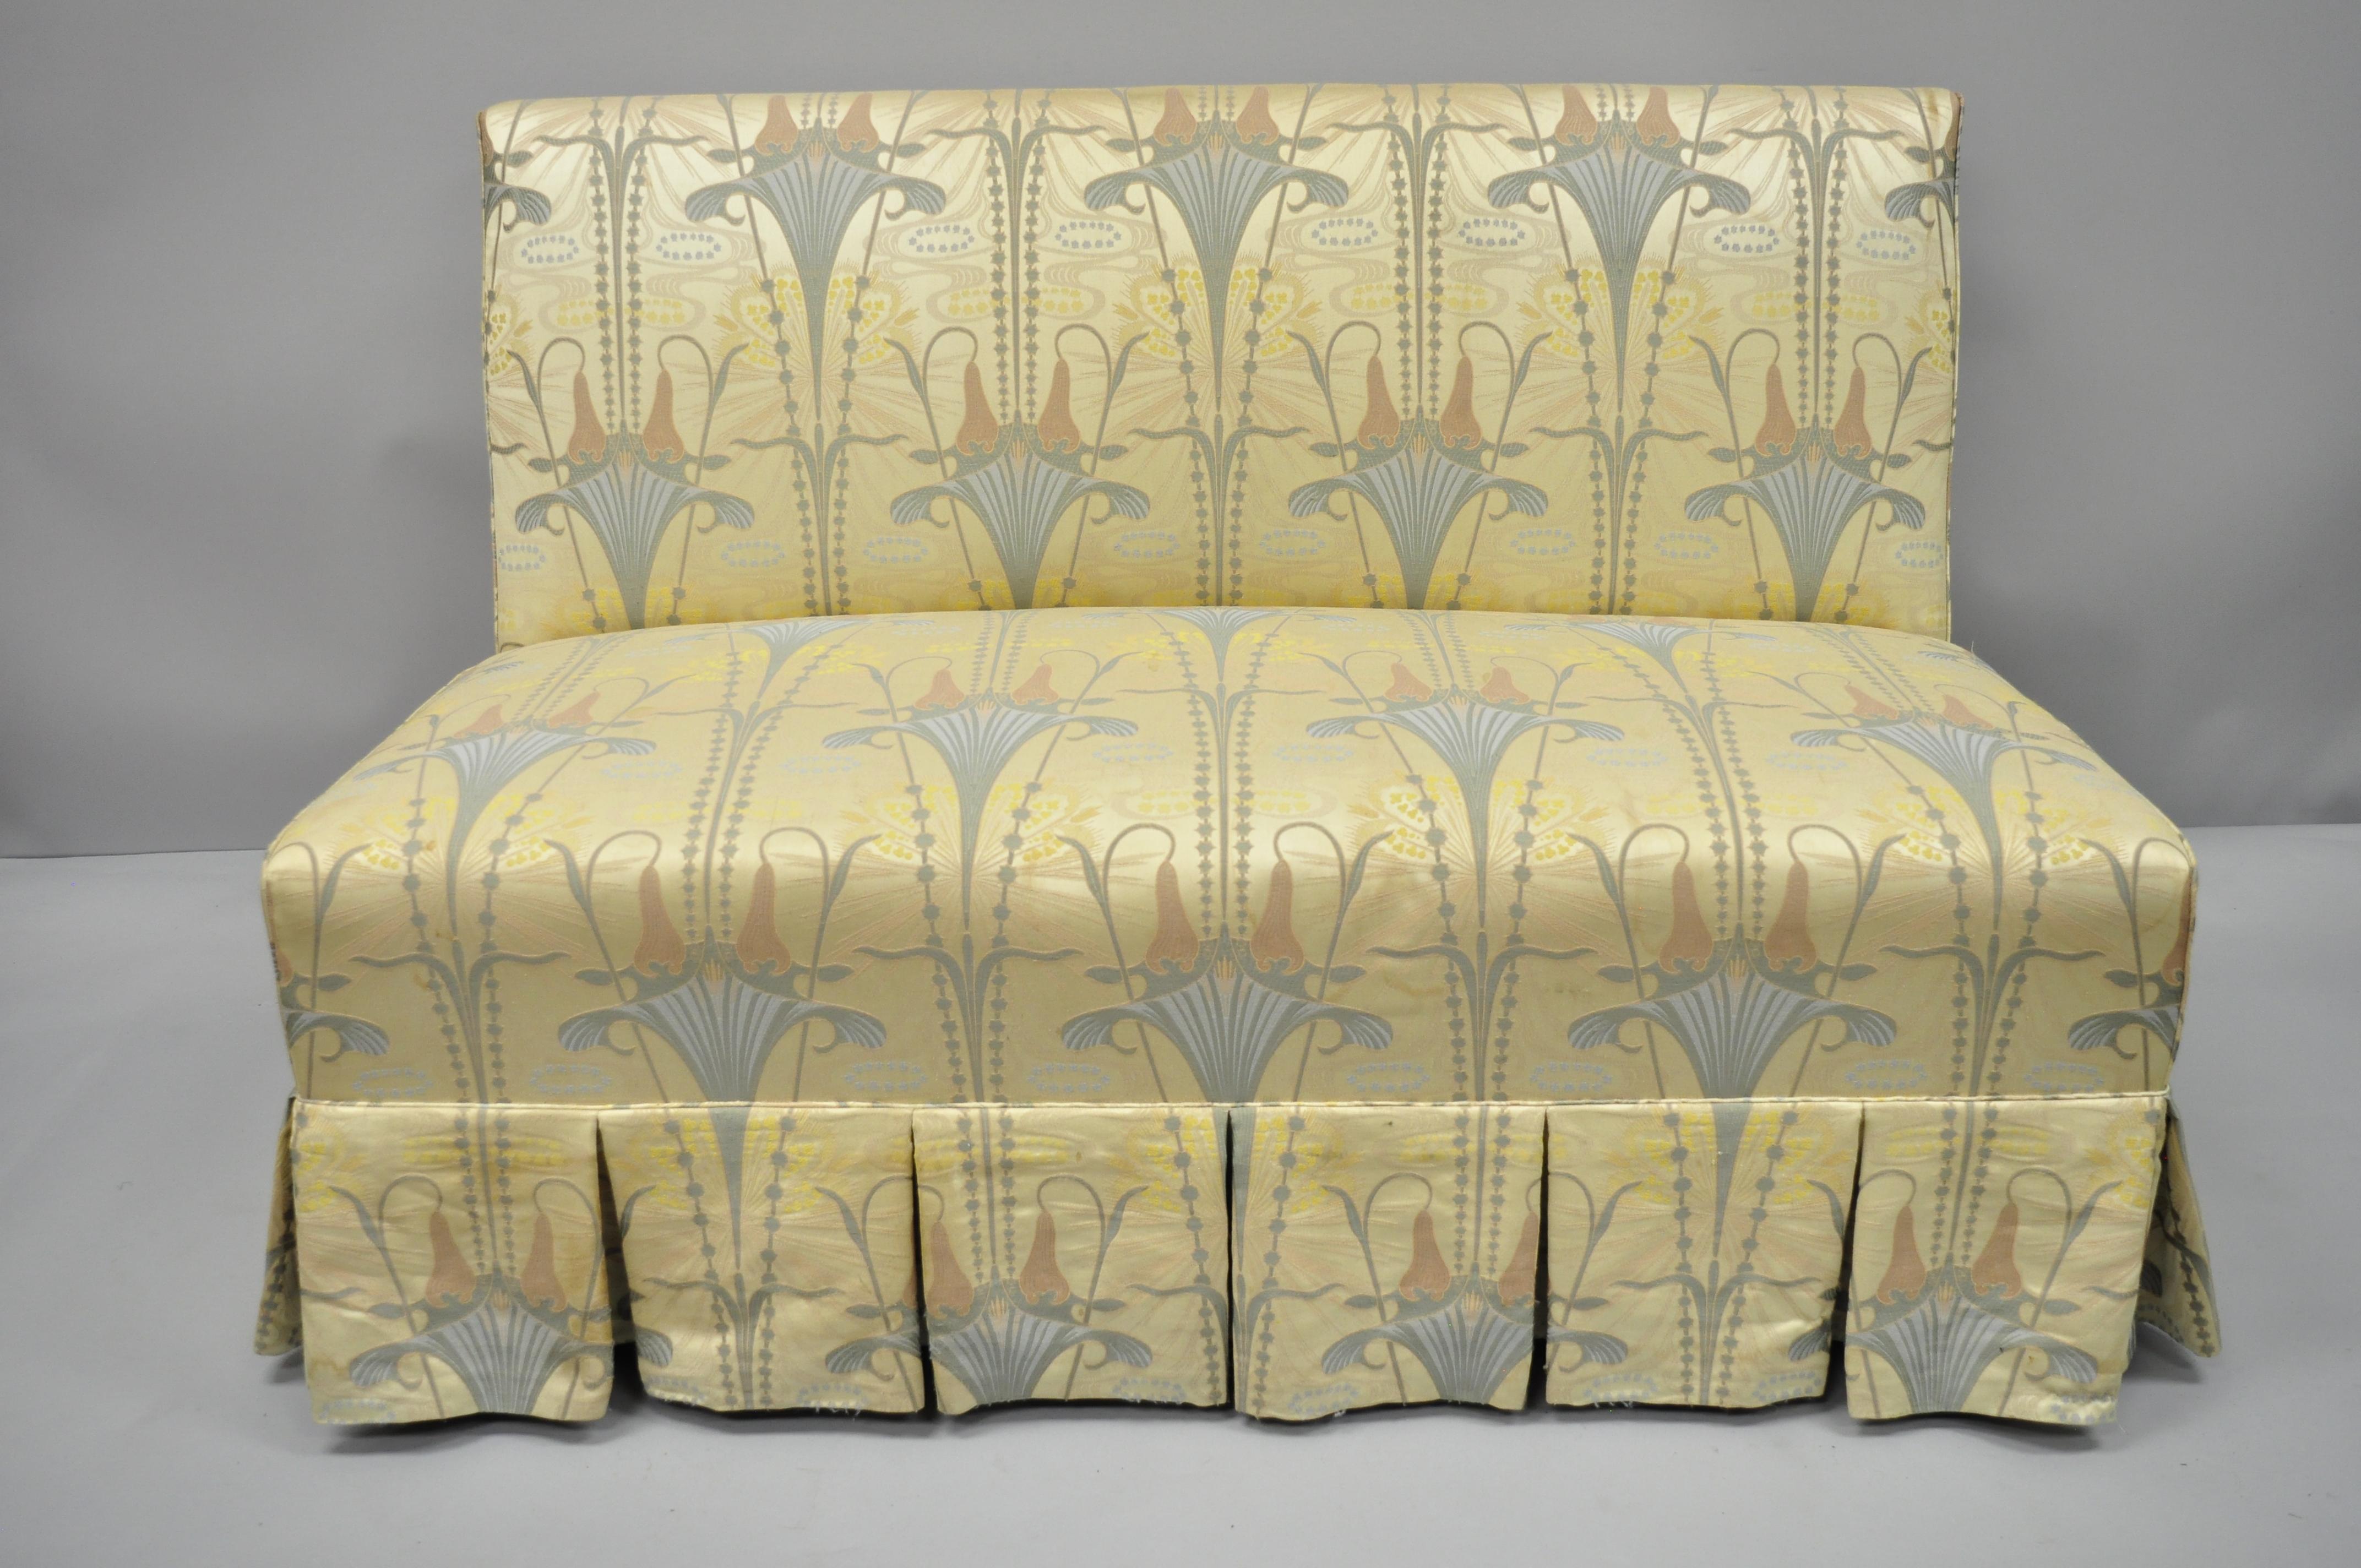 Custom floral Art Nouveau fabric gold blue slipper chair armless loveseat. Item features fully upholstered with skirt, beautiful Art Nouveau inspired floral printed pink, gold, and blue fabric, heavy solid wood frame, quality American craftsmanship,